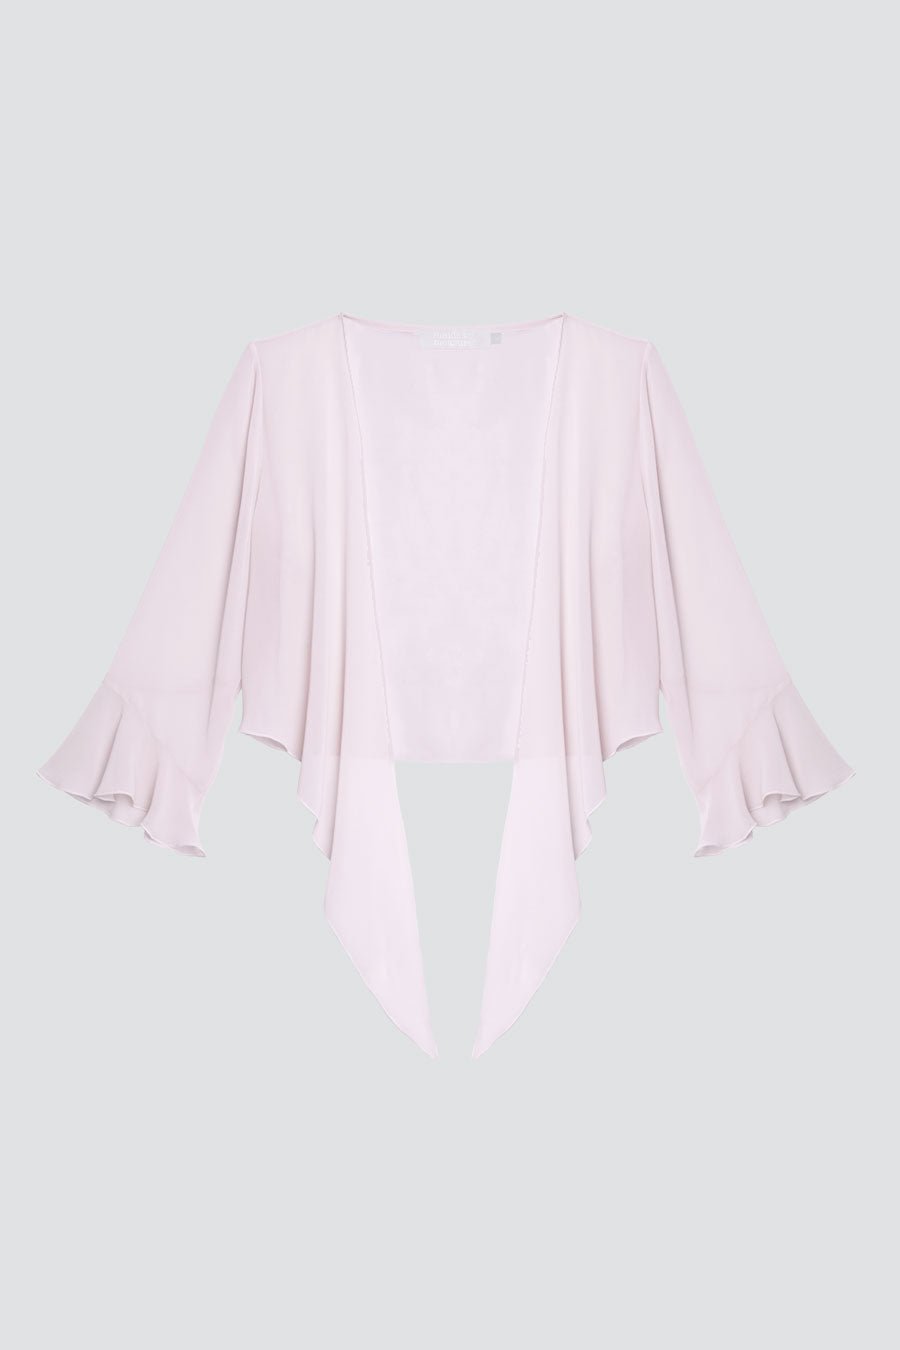 Long Sleeve Chiffon Cover Up - Blossom - Maids to Measure